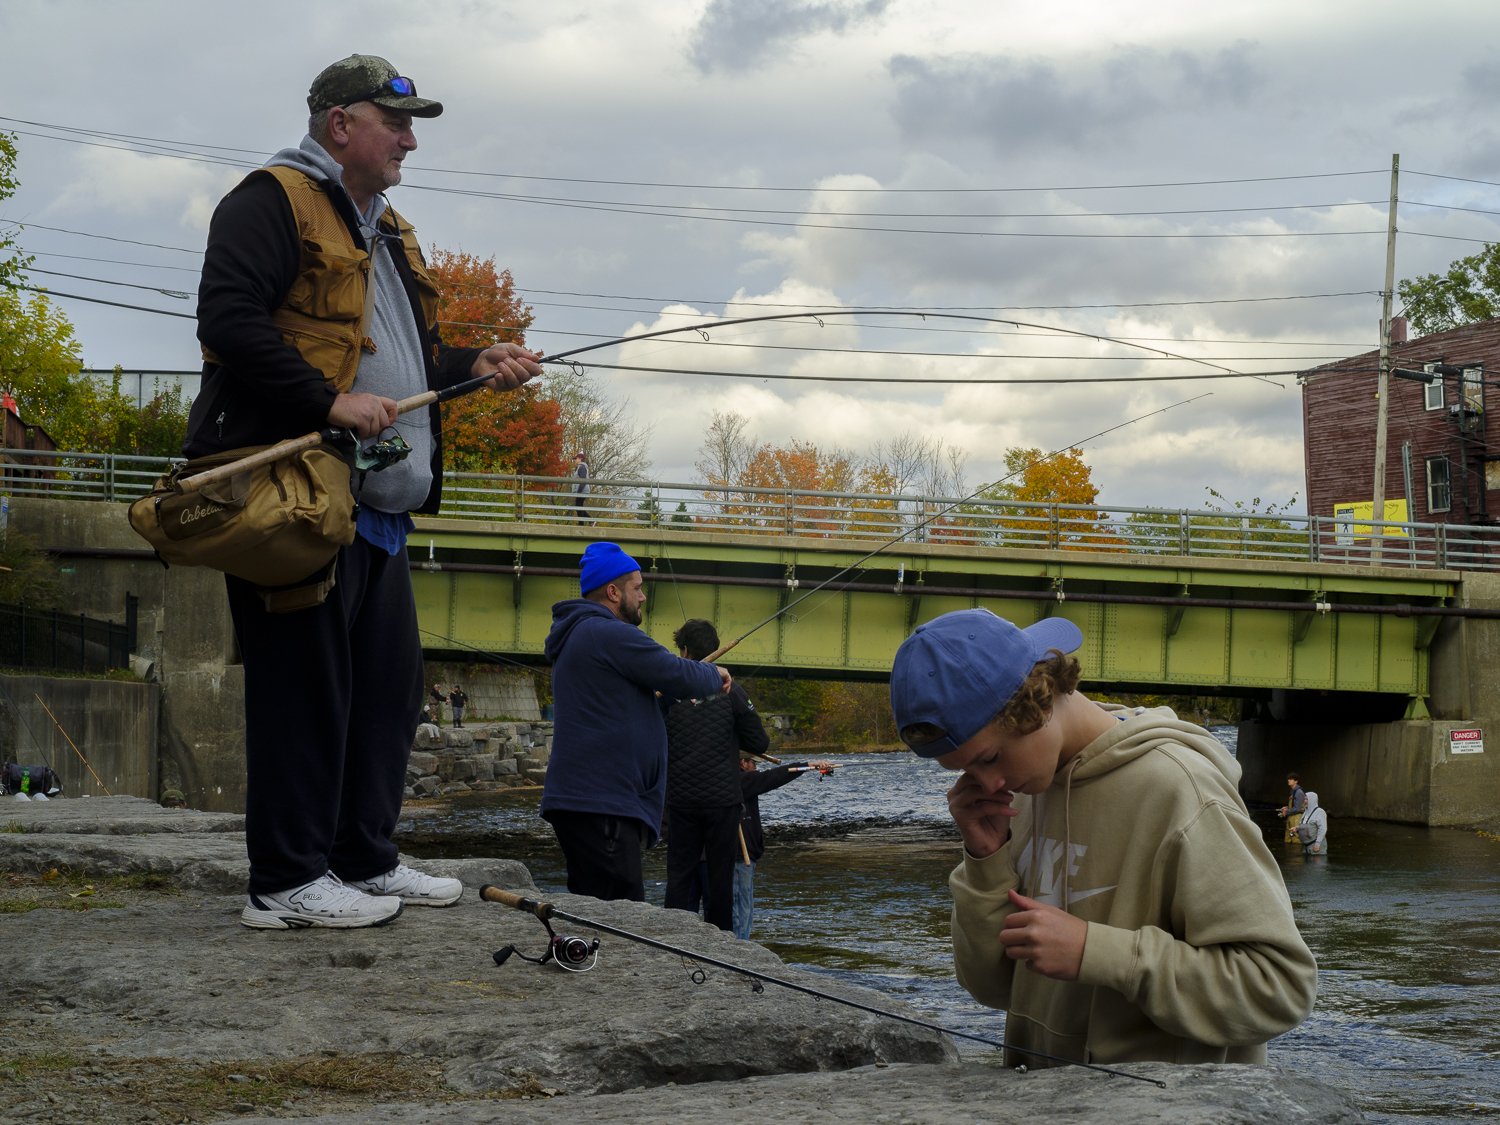  Alfred Hager, a truck driver from Buffalo, New York fishes with his family at a public access site on the Salmon River in Downtown Pulaski.  